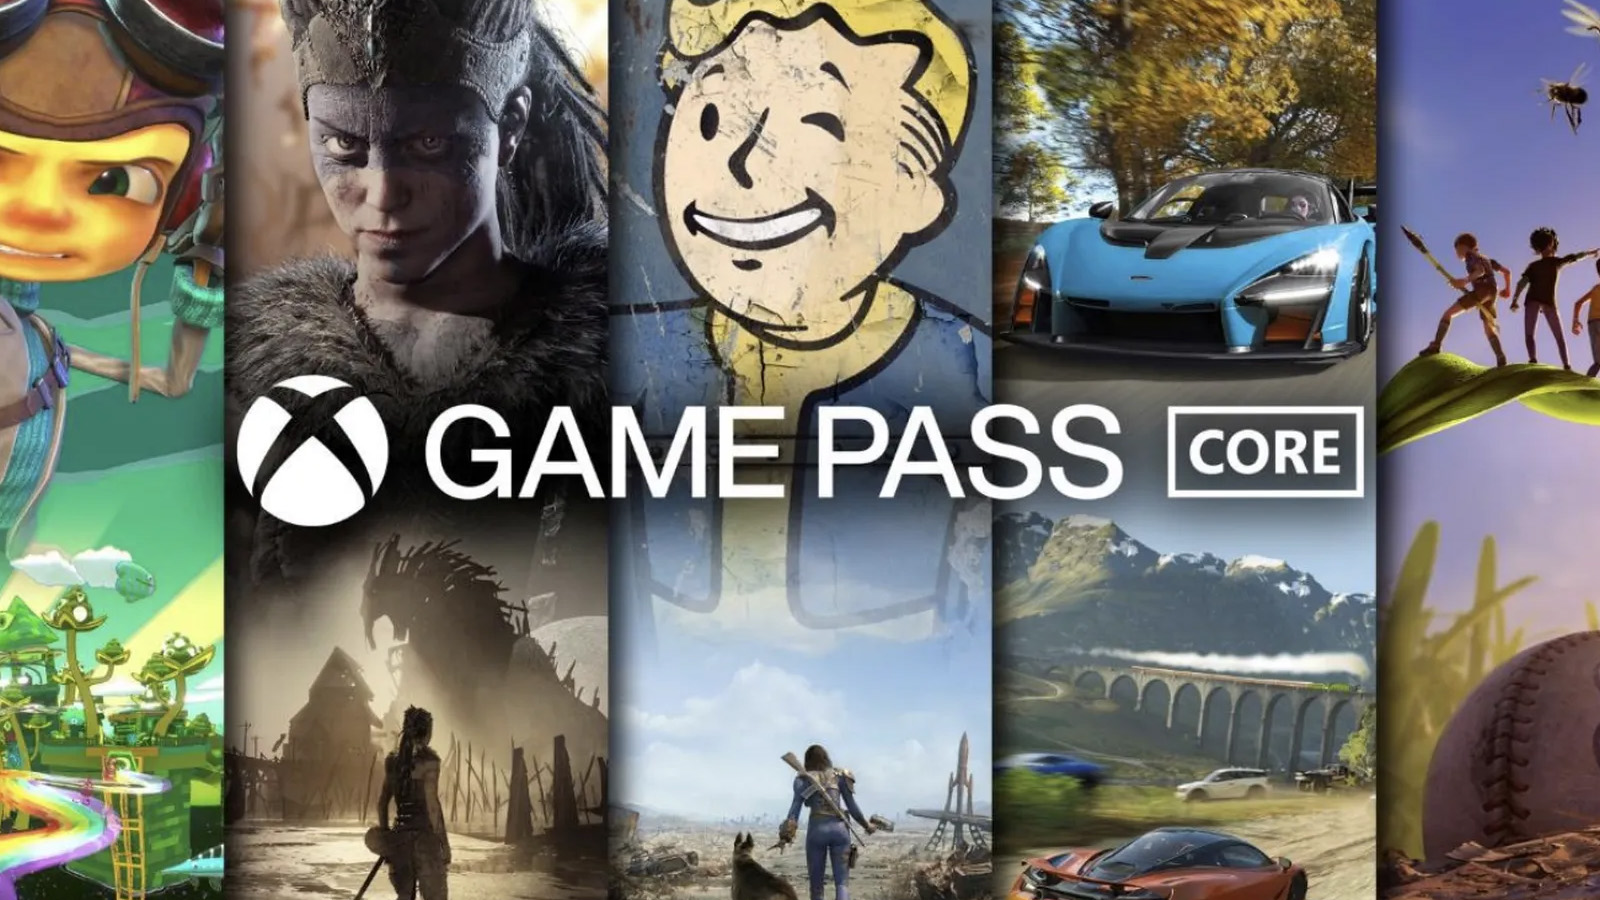 Xbox Game Pass: Microsoft Reaffirms Commitment to Bulking Up Service